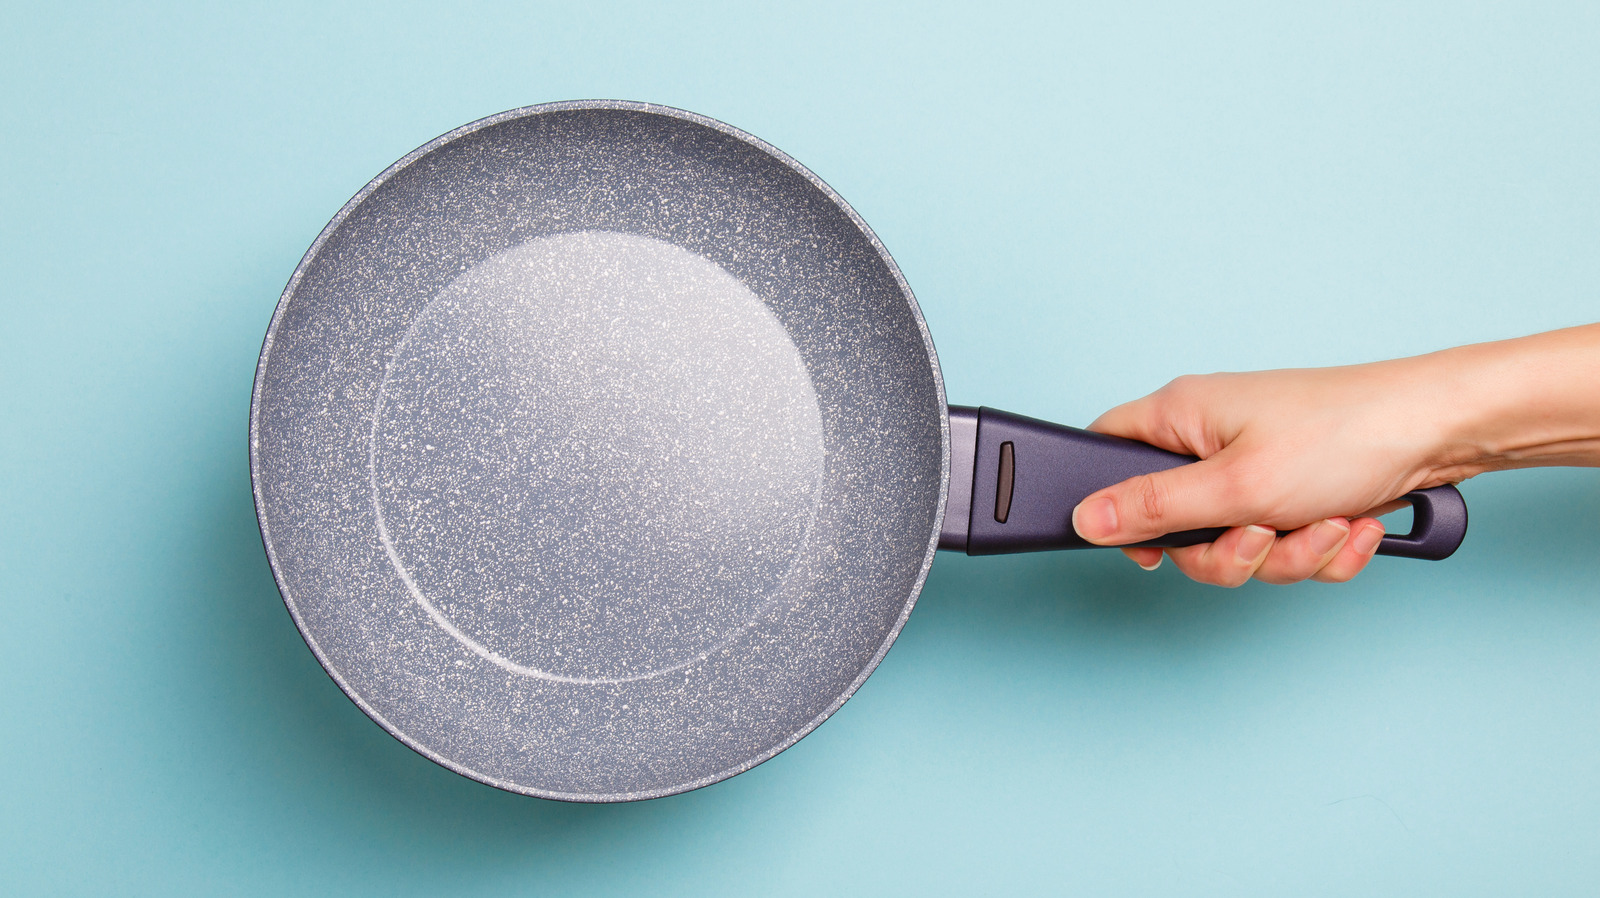 The 12 Best Ceramic Cookware Sets of 2021 - PureWow